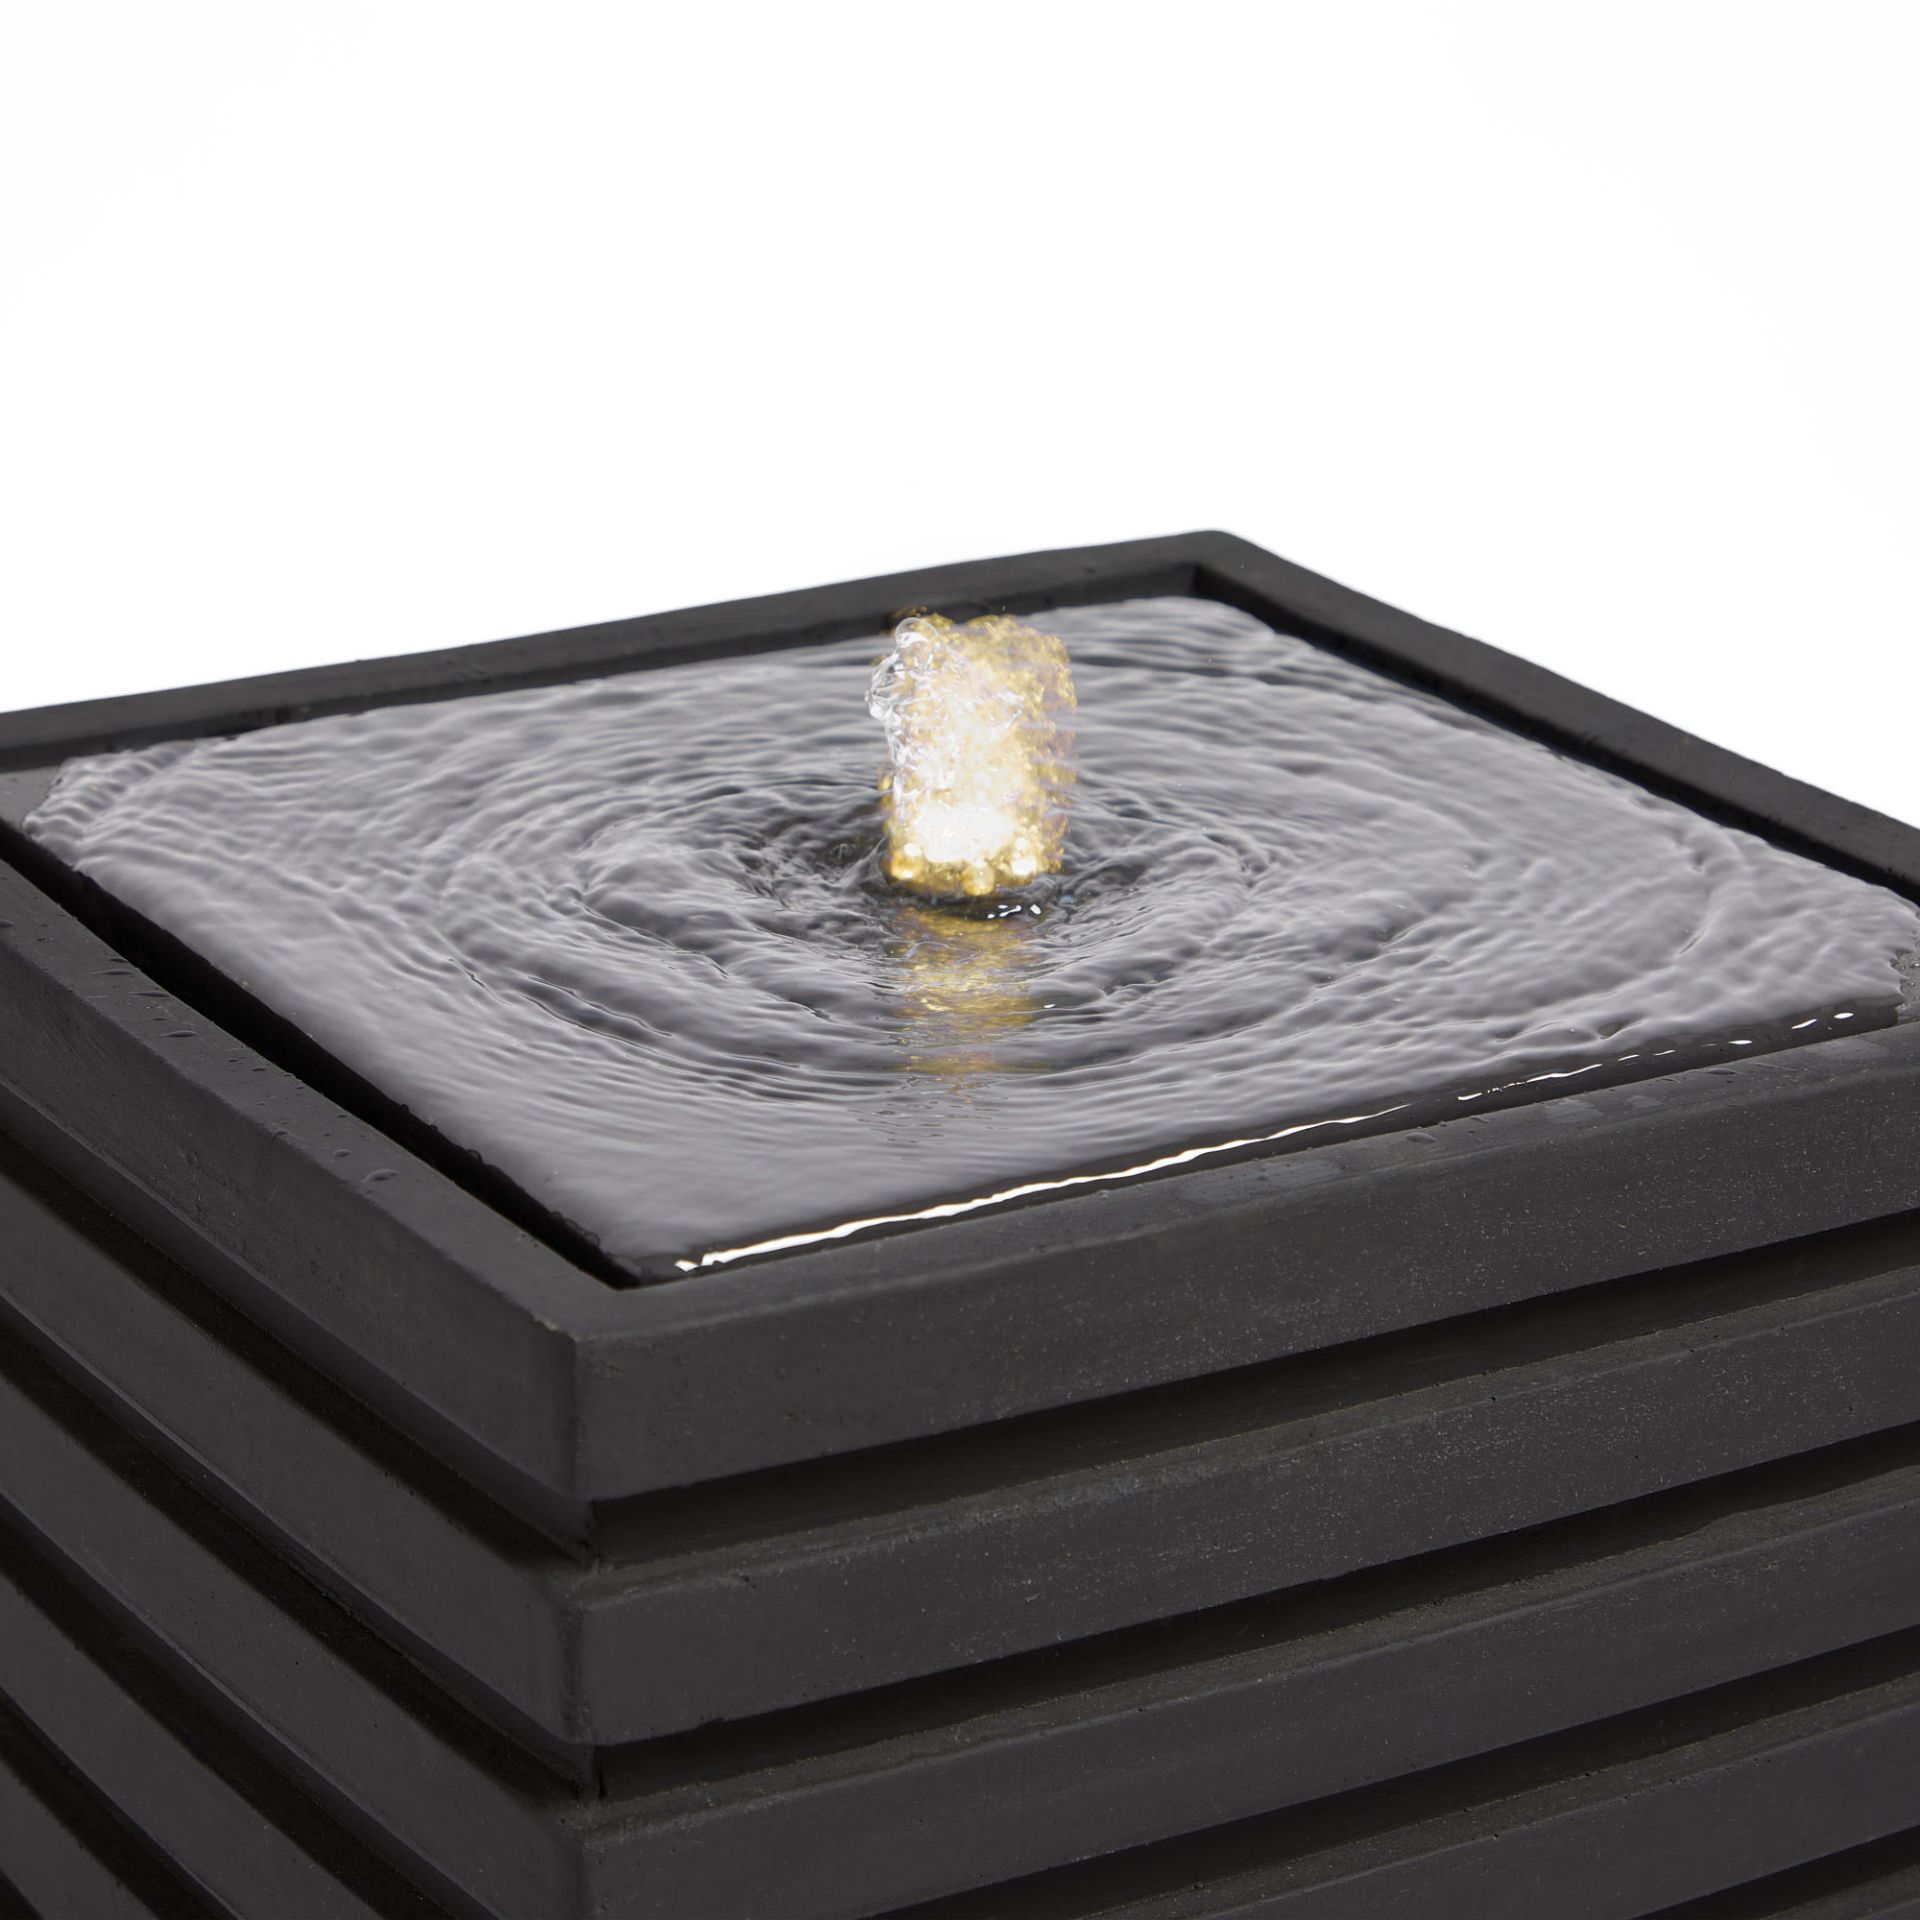 PALLET TO CONTAIN 12 x New & Boxed LED Ribbed Cube Water Feature. RRP £299.99 EACH. (REF723) - Image 5 of 6